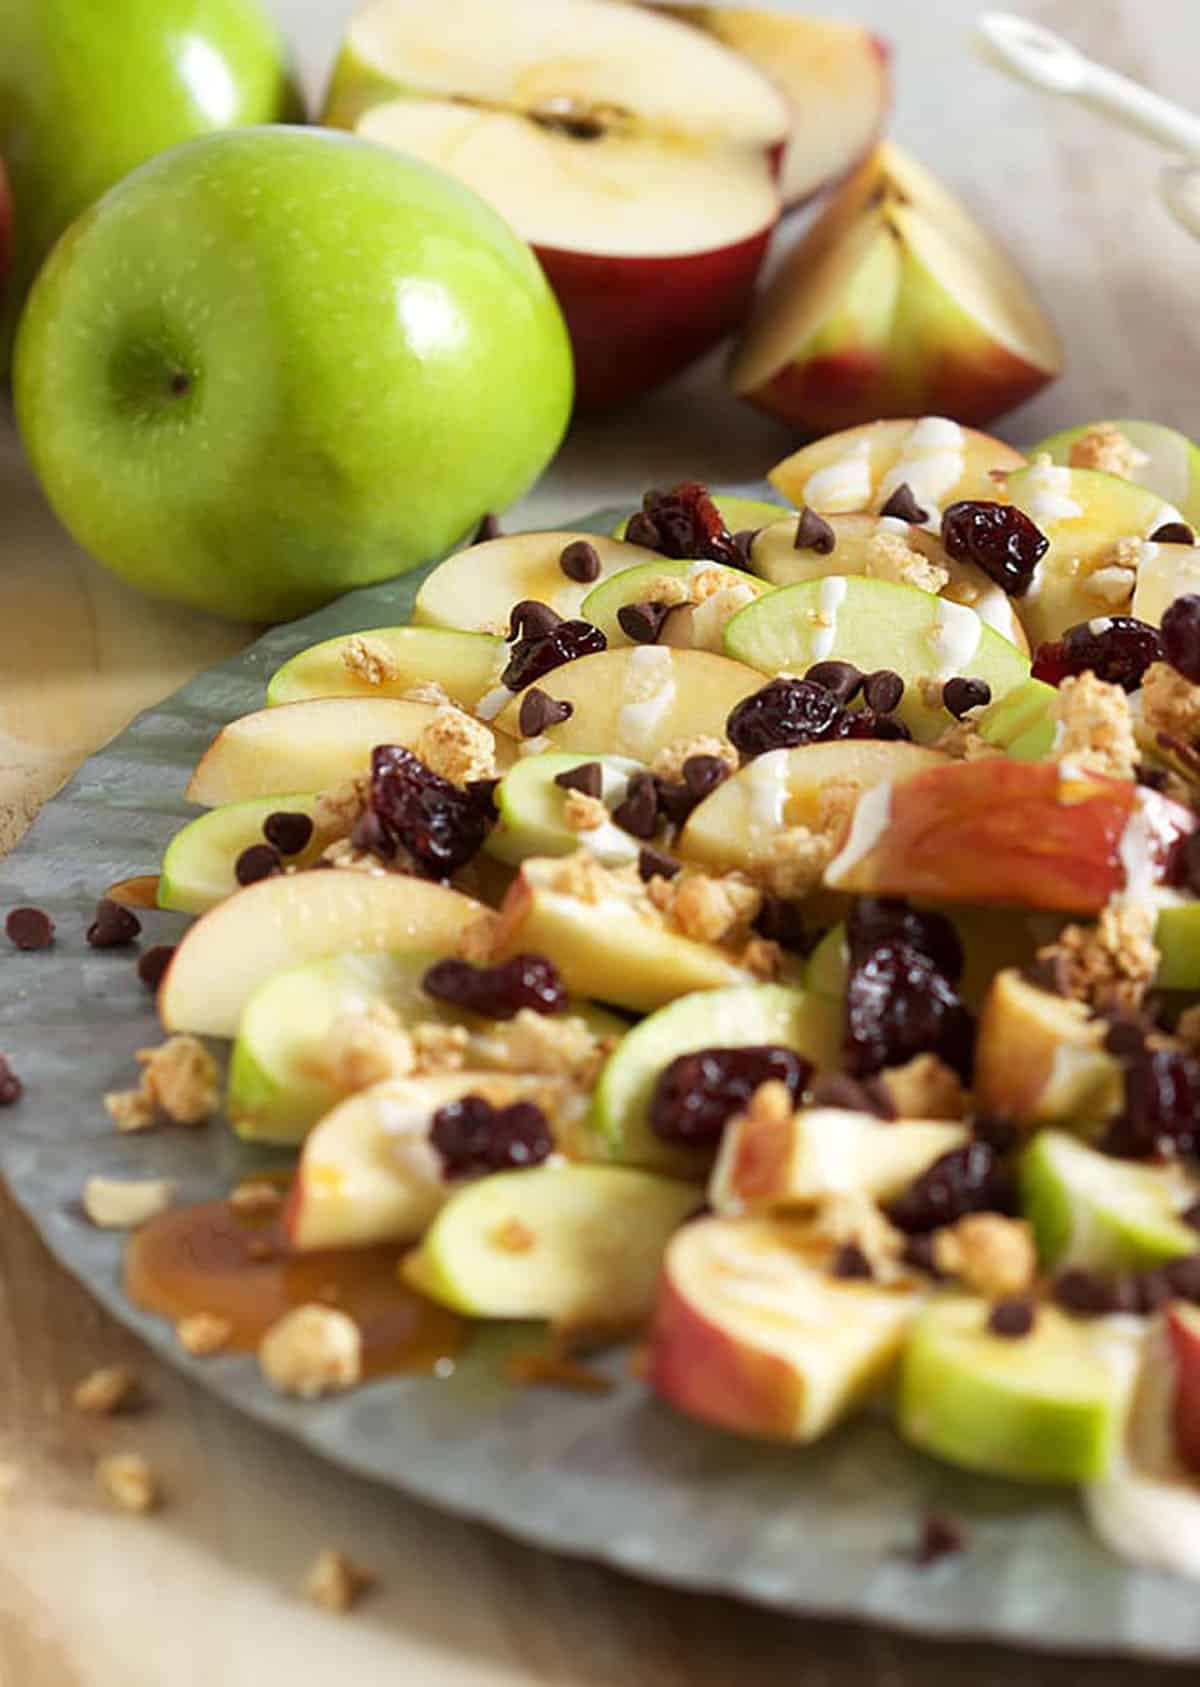 Caramel Apple Nachos on a platter with a green apple in the background.